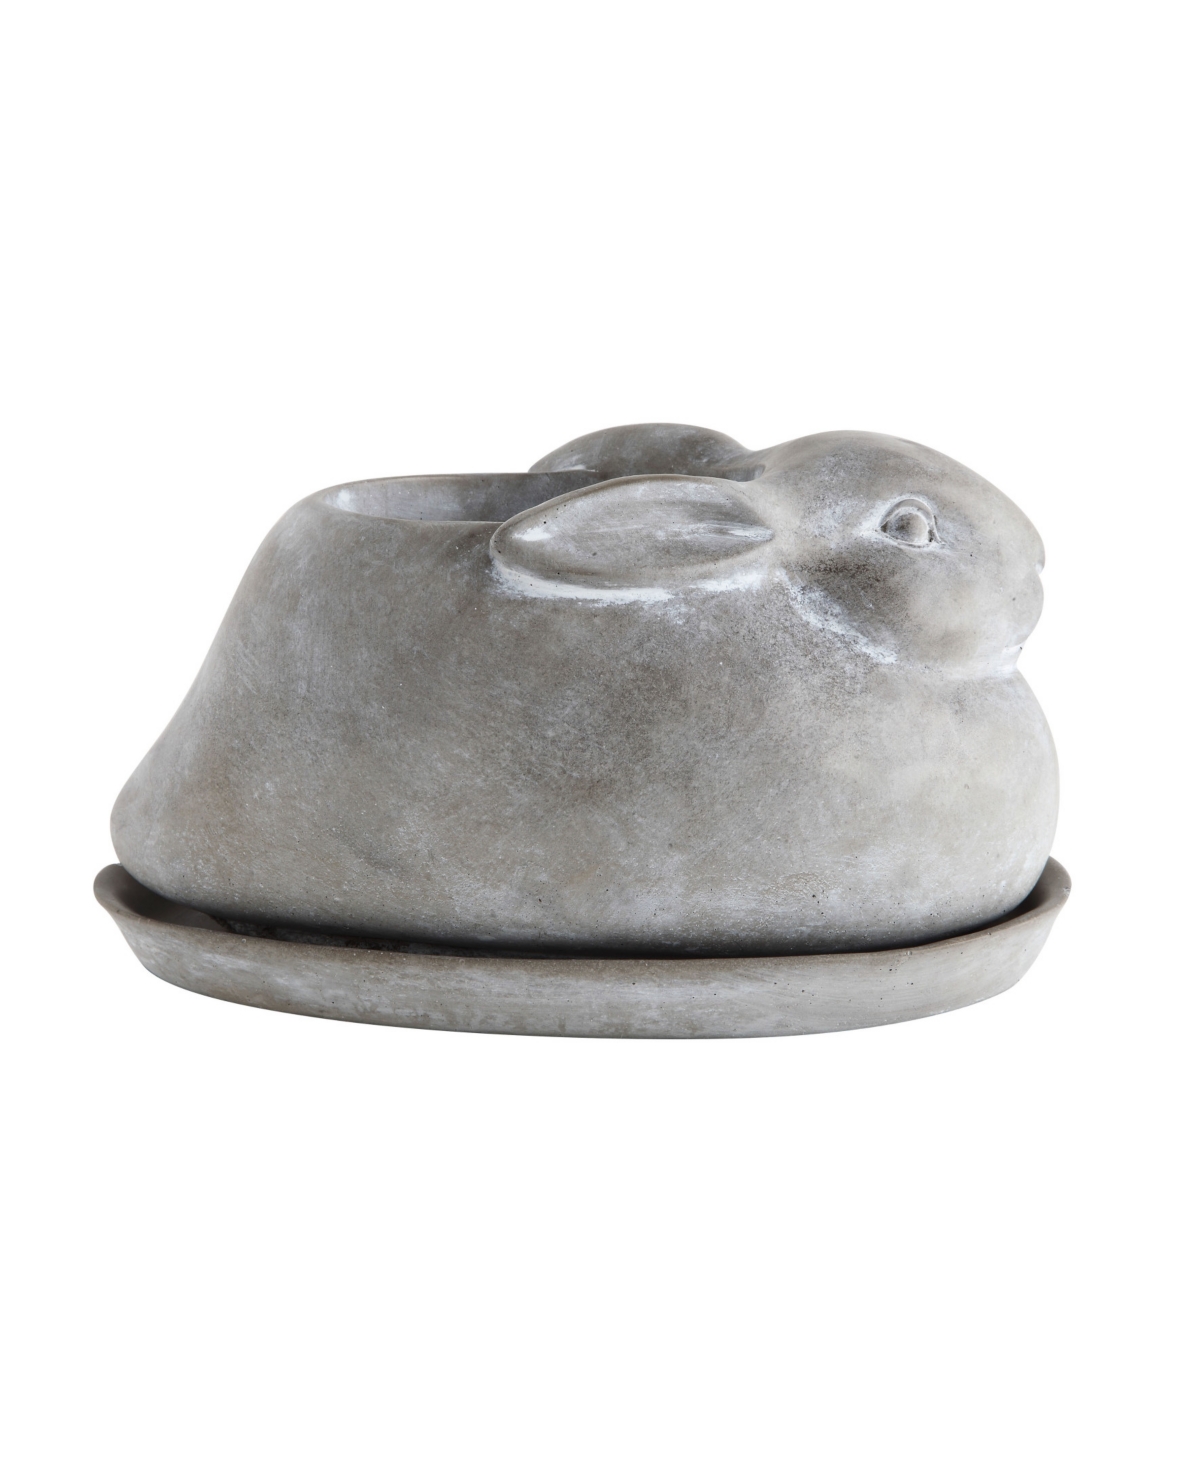 Cement Rabbit Planter with Saucer Set of 2 Pieces - Gray